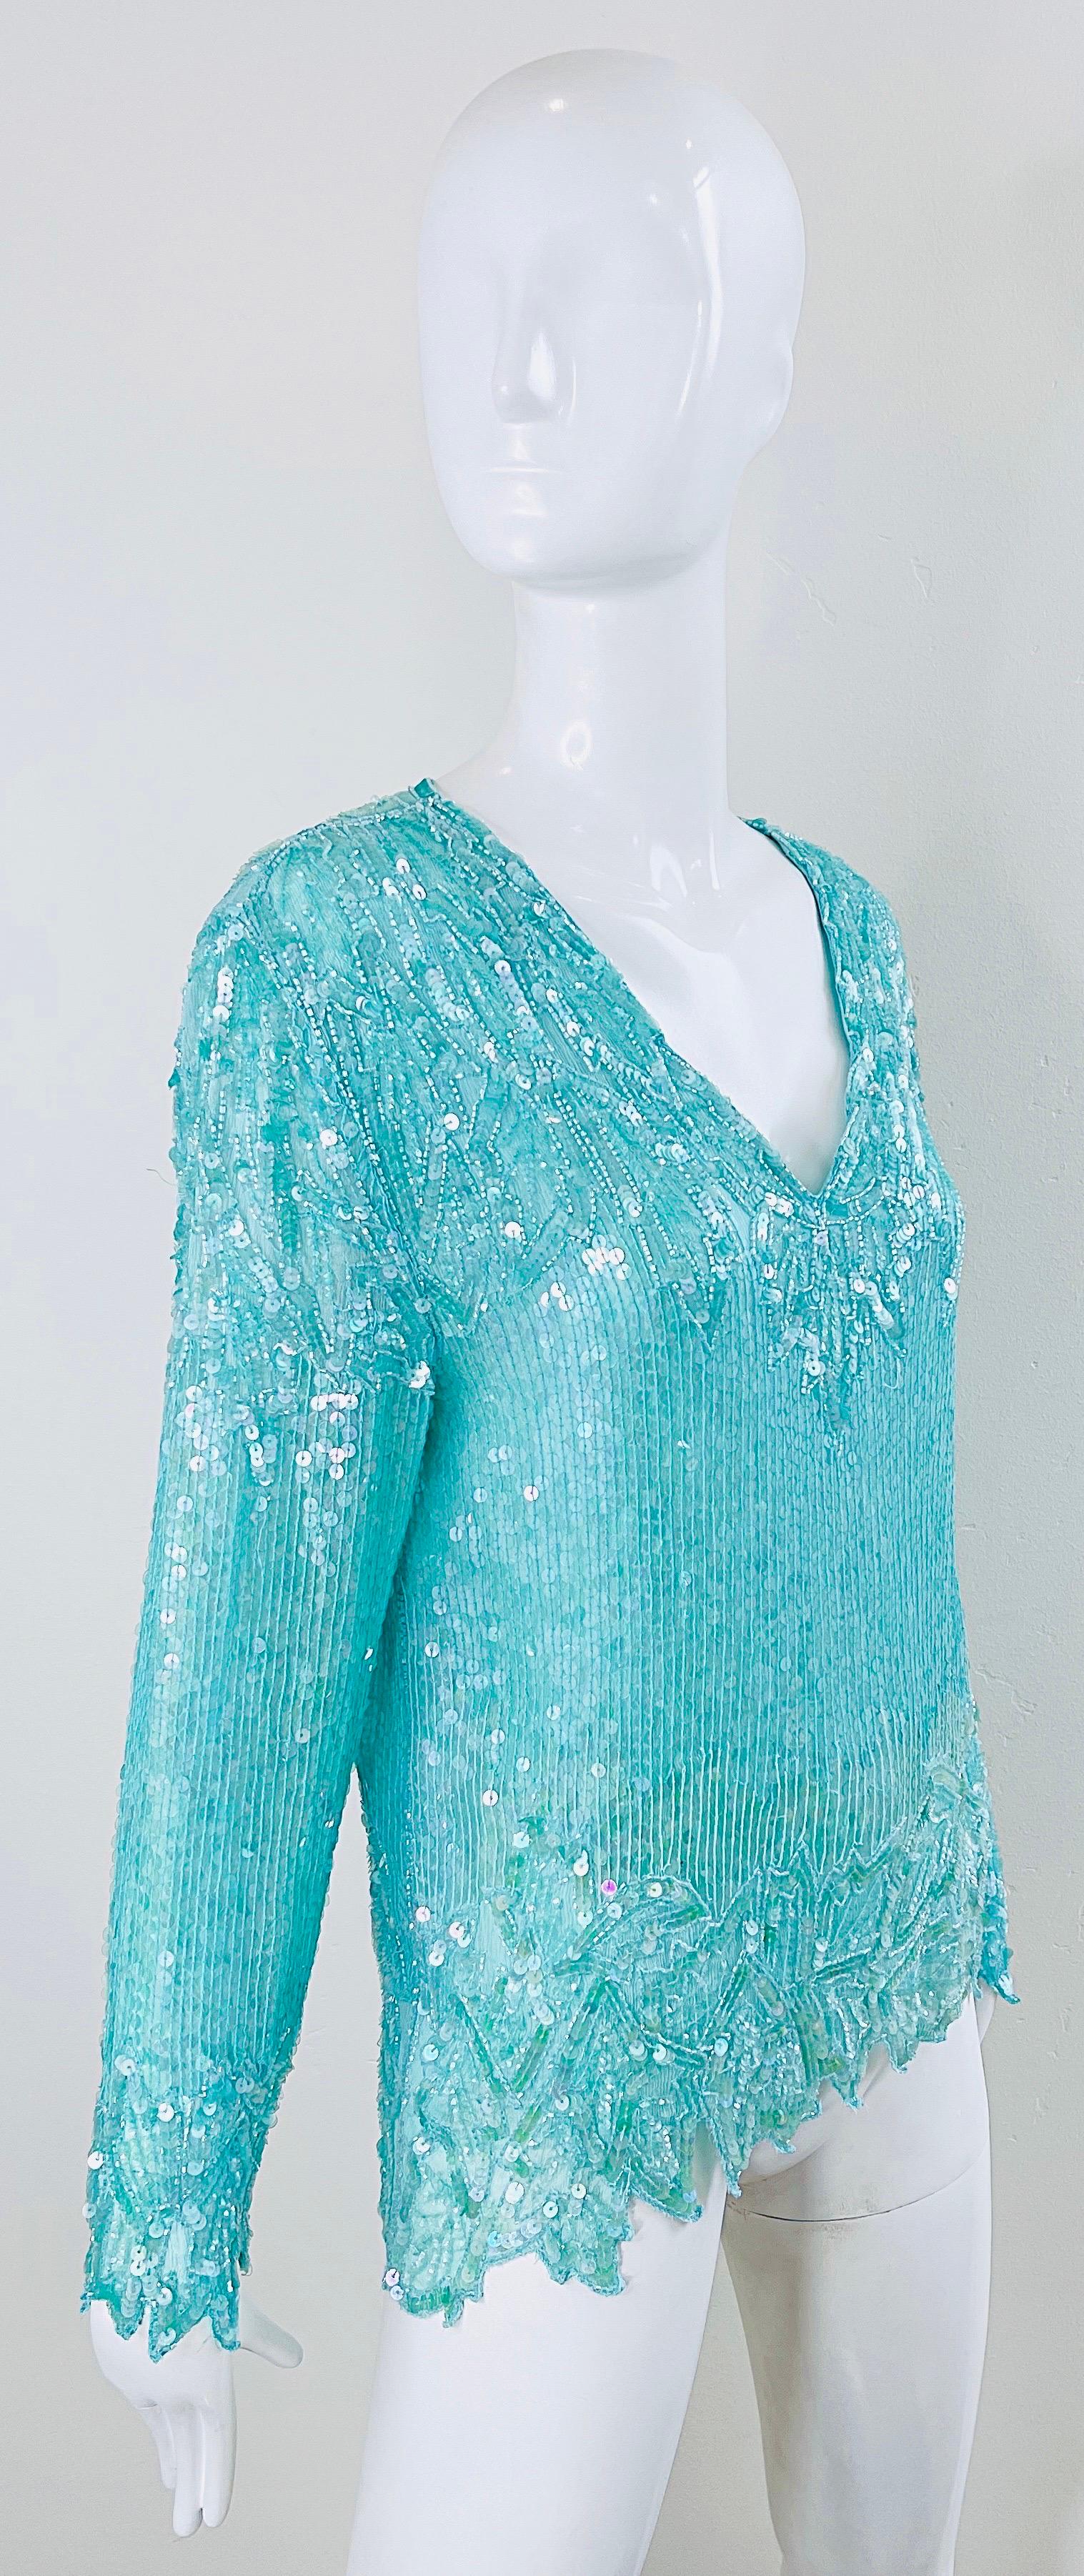 1980s Swee Lo Turquoise Blue Sequin Beaded Silk Chiffon Vintage 80s Blouse For Sale 8